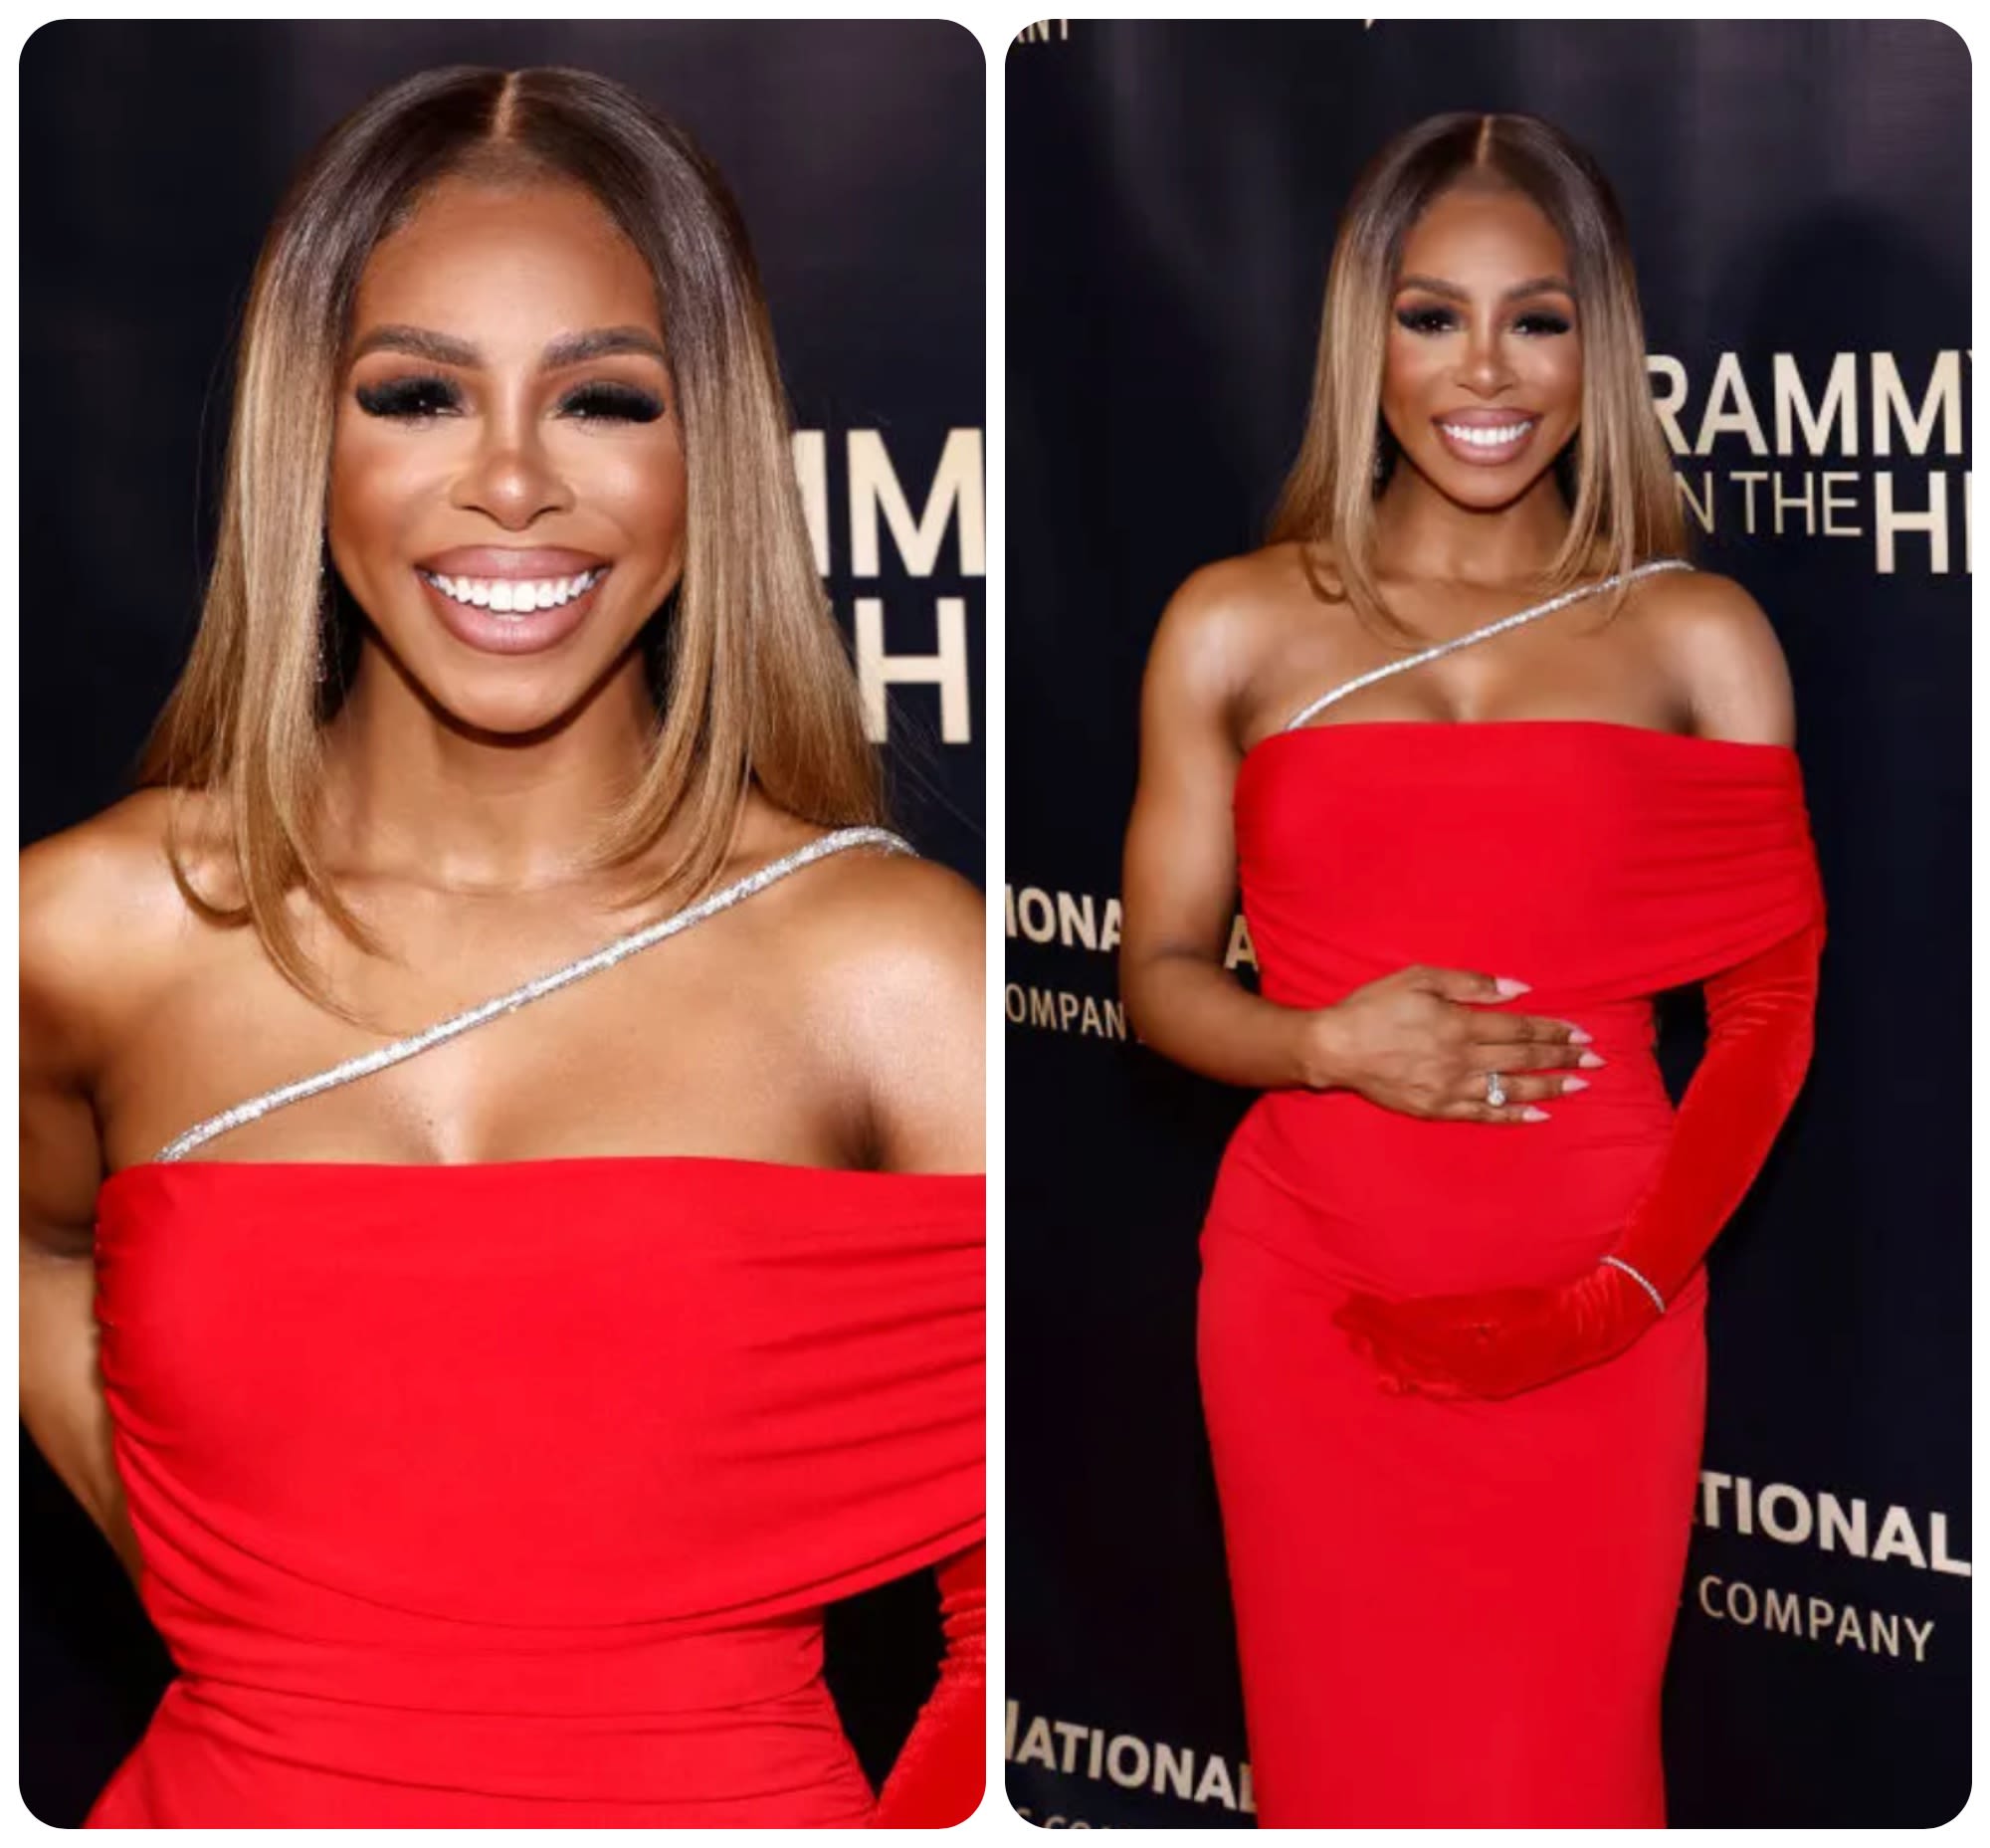 Glowing & Gorgeous: Candiace Dillard Bassett Debuts Her 'Drive Back' Baby Bump In Radiant Red Look